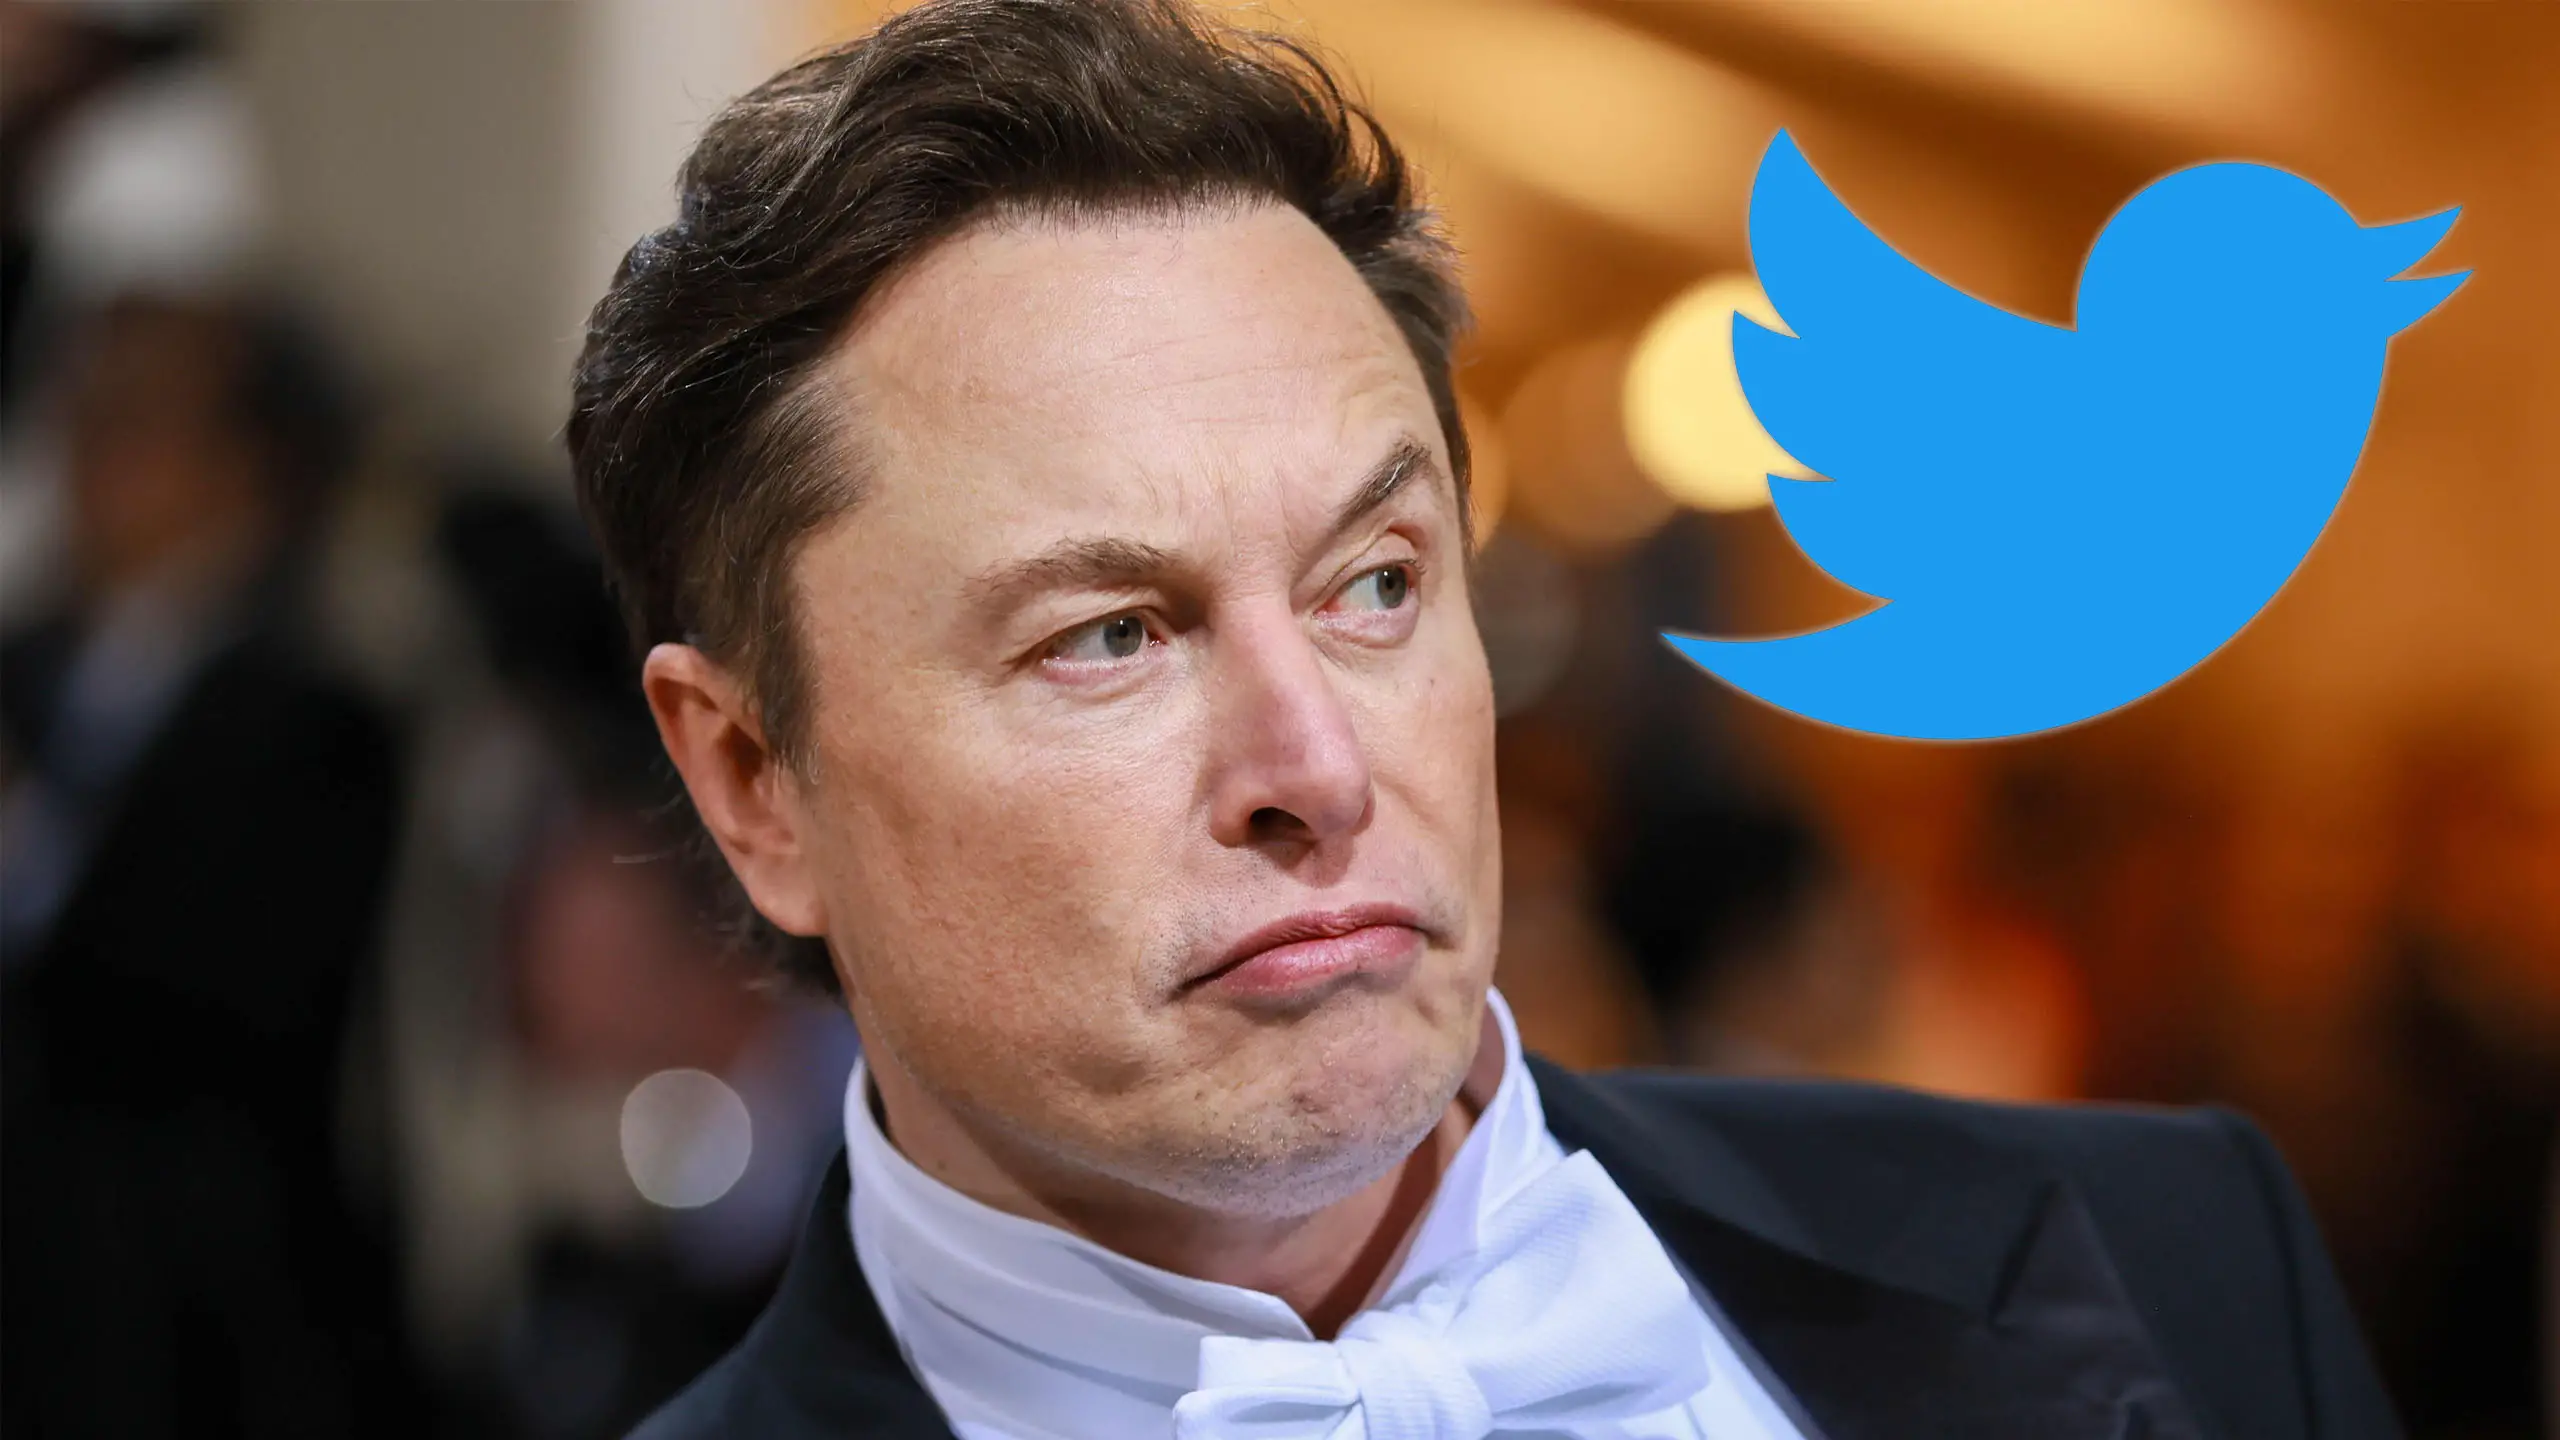 Twitter dropped in revenue due to activist groups pressuring advertisers, says new owner Elon Musk